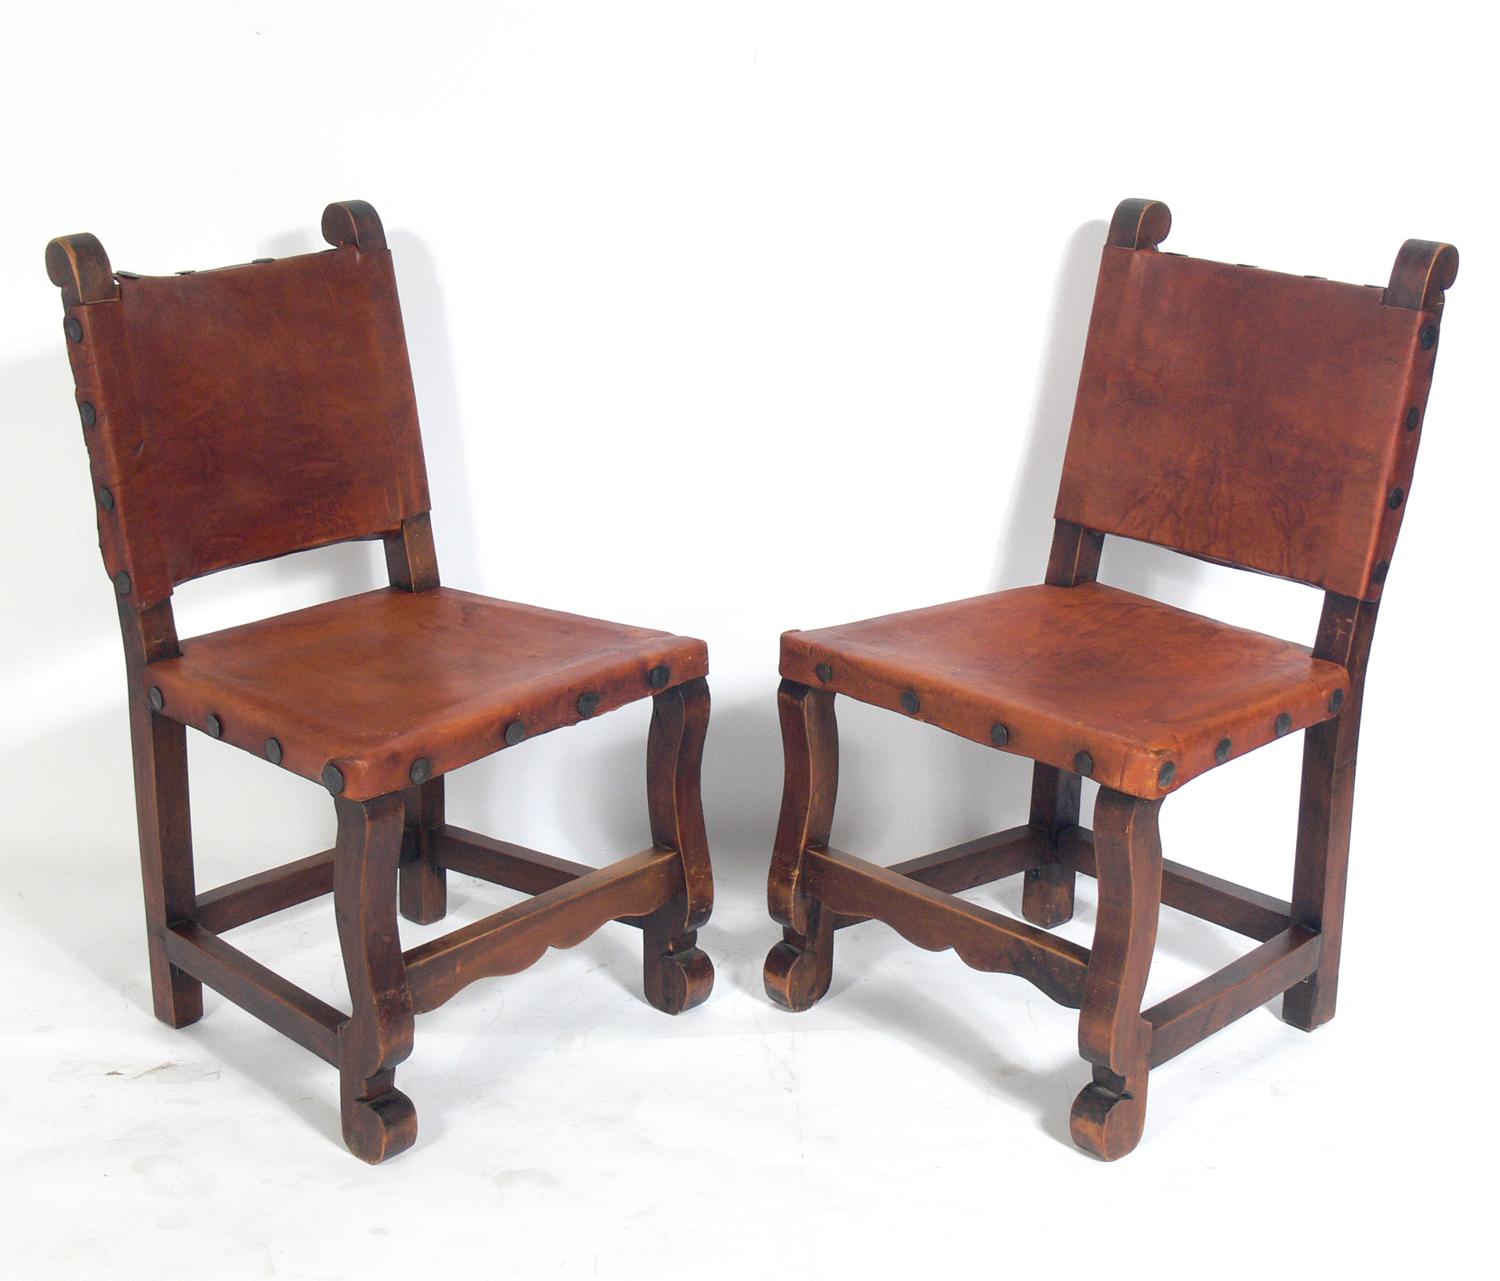 Mexican Leather Dining Chairs, Mexican Leather And Wood Chairs